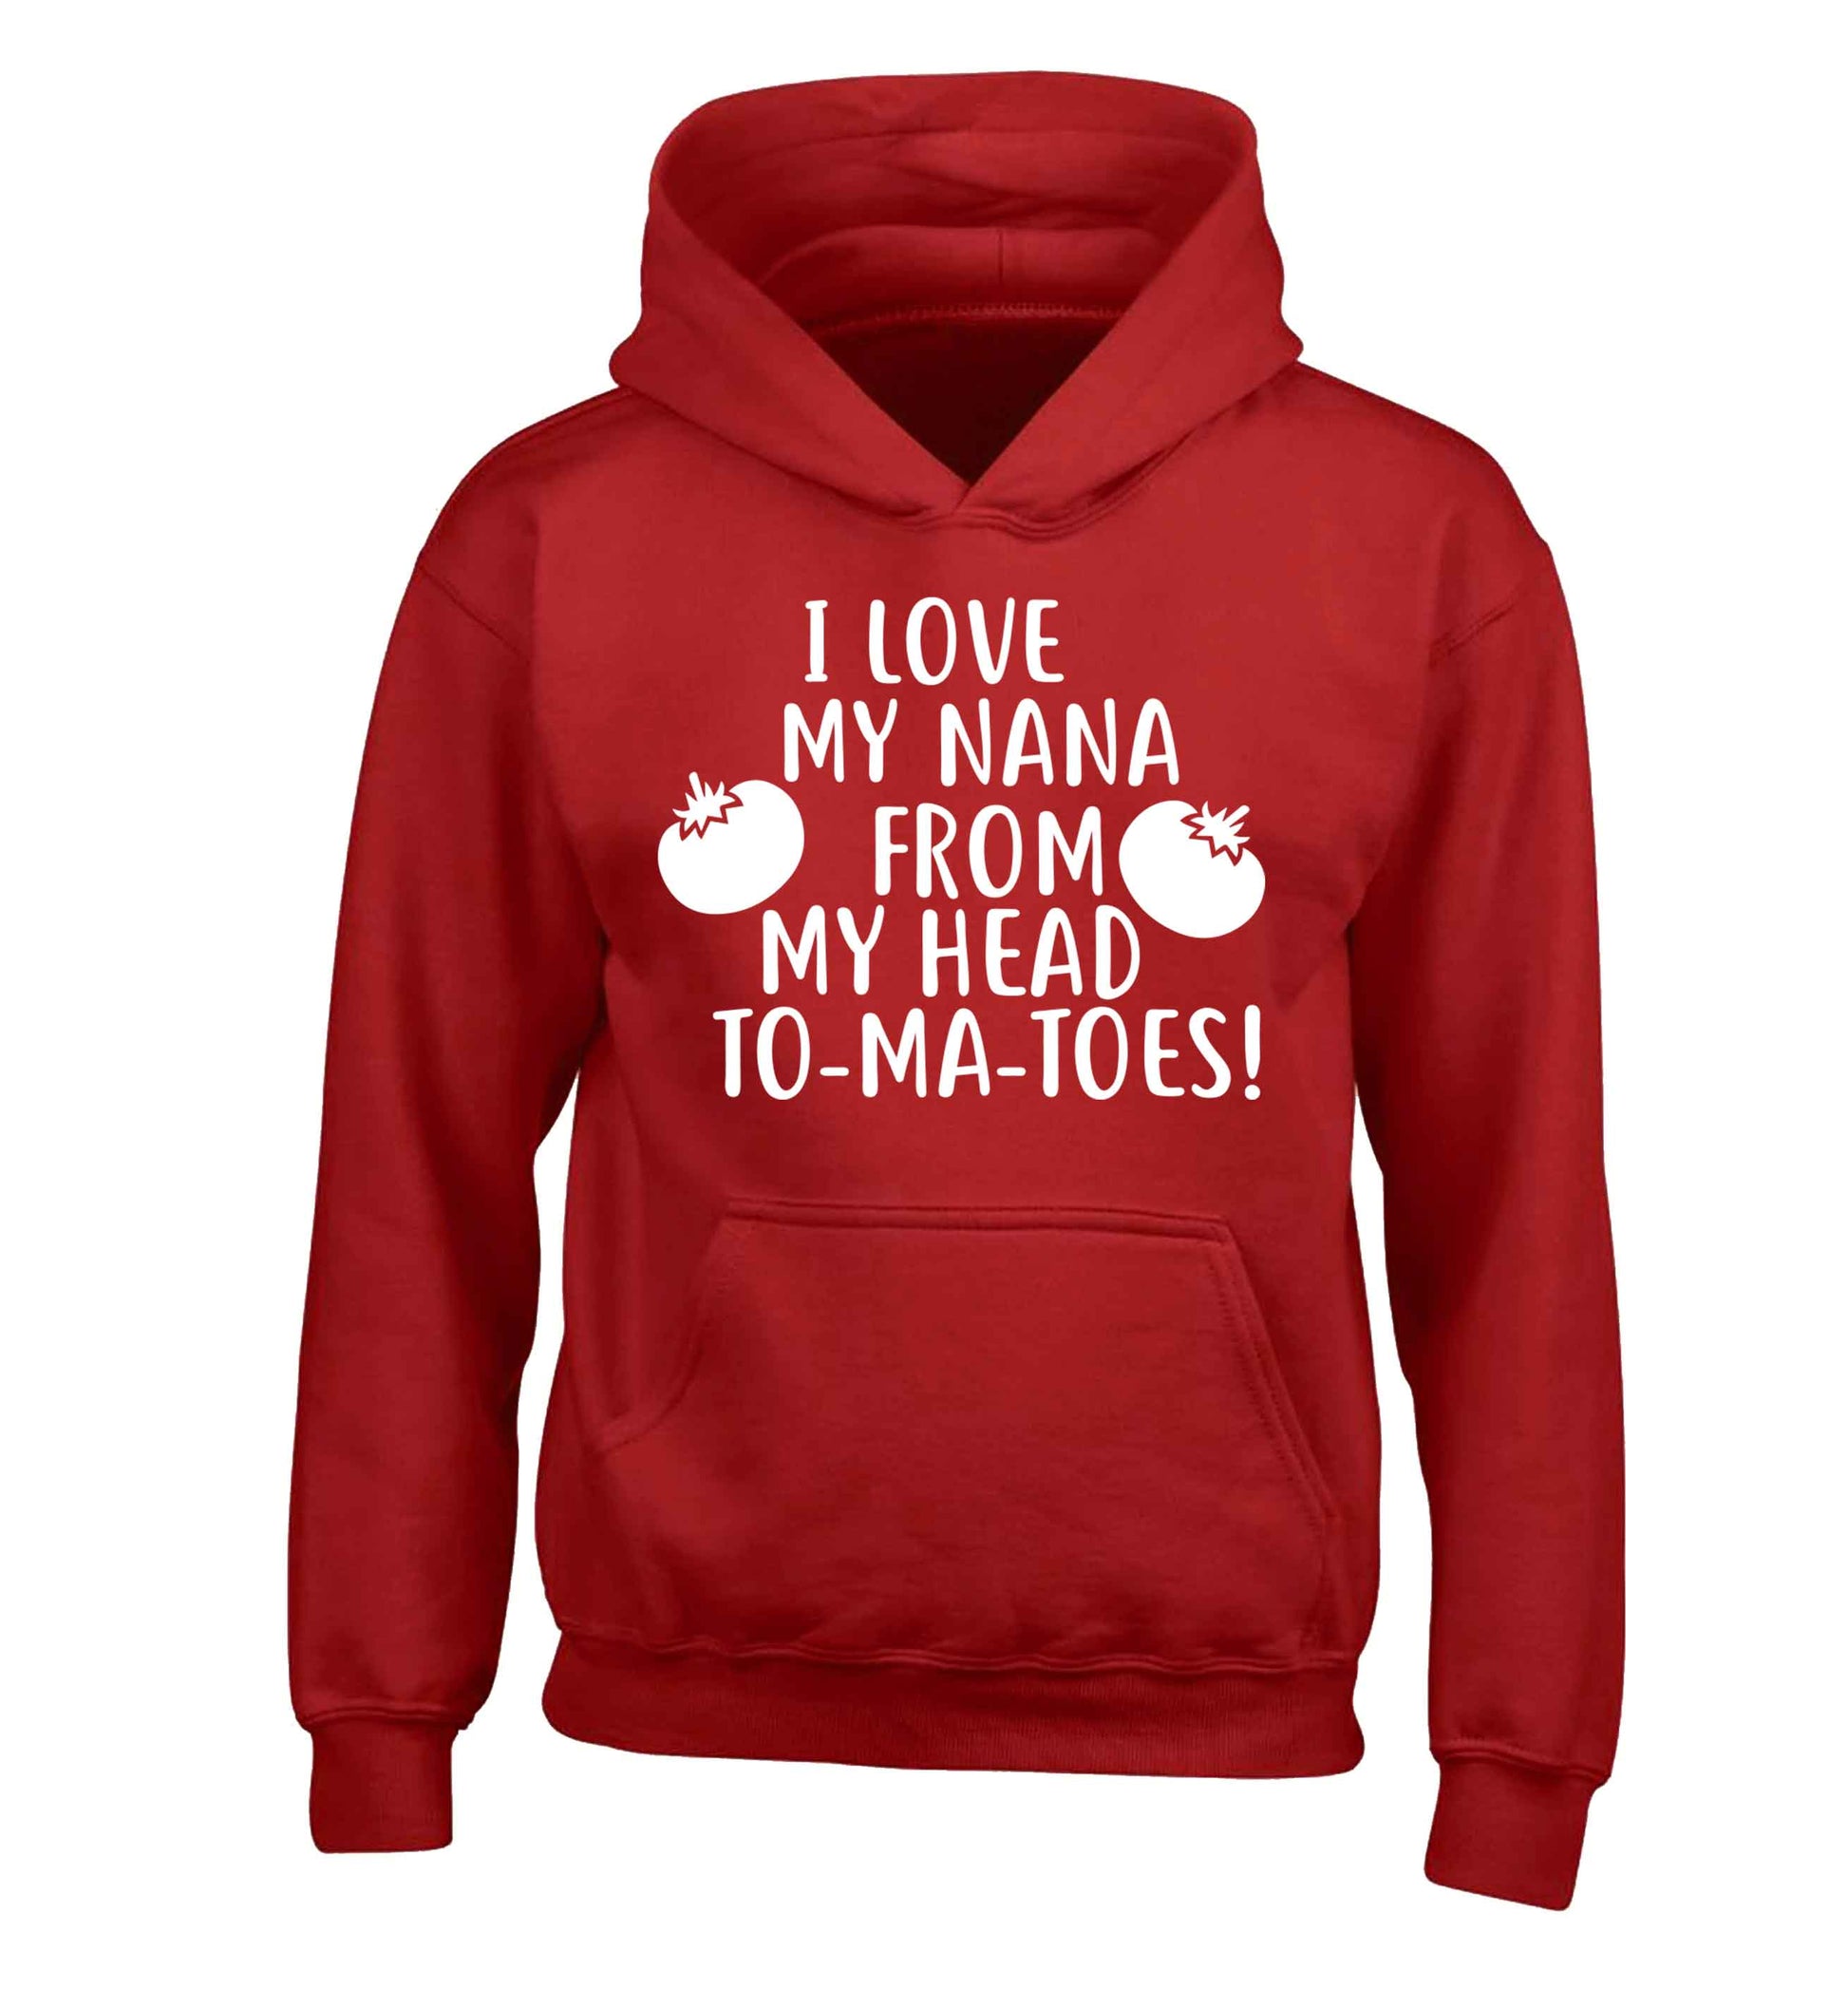 I love my nana from my head to-ma-toes children's red hoodie 12-13 Years